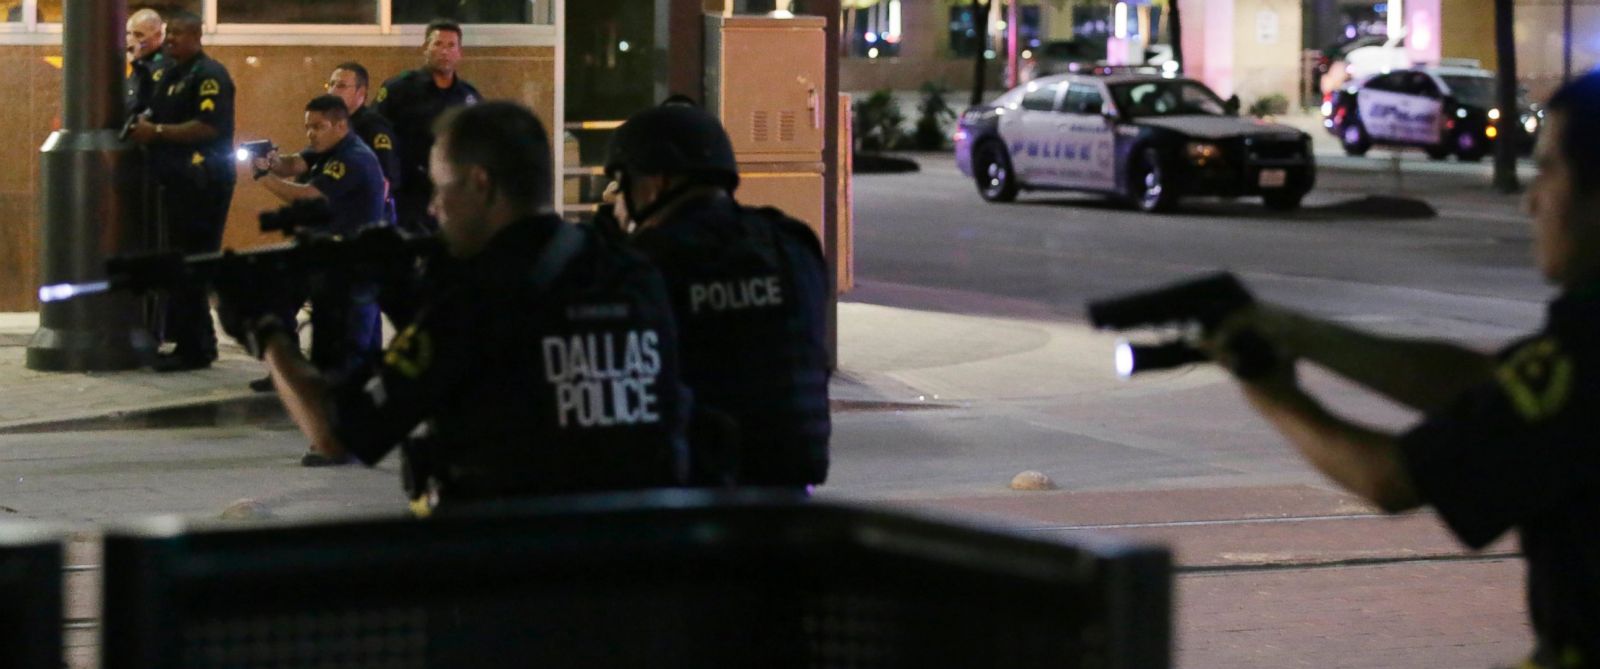 Rough moment...Eleven police officers were shot ambush-style, including five fatally, in Dallas Thursday night by at least two snipers, amid a protest against the recent police shootings of two black men, Alton Sterling in Louisiana, and Philando Castile in Minnesota, according to the Dallas Police. 